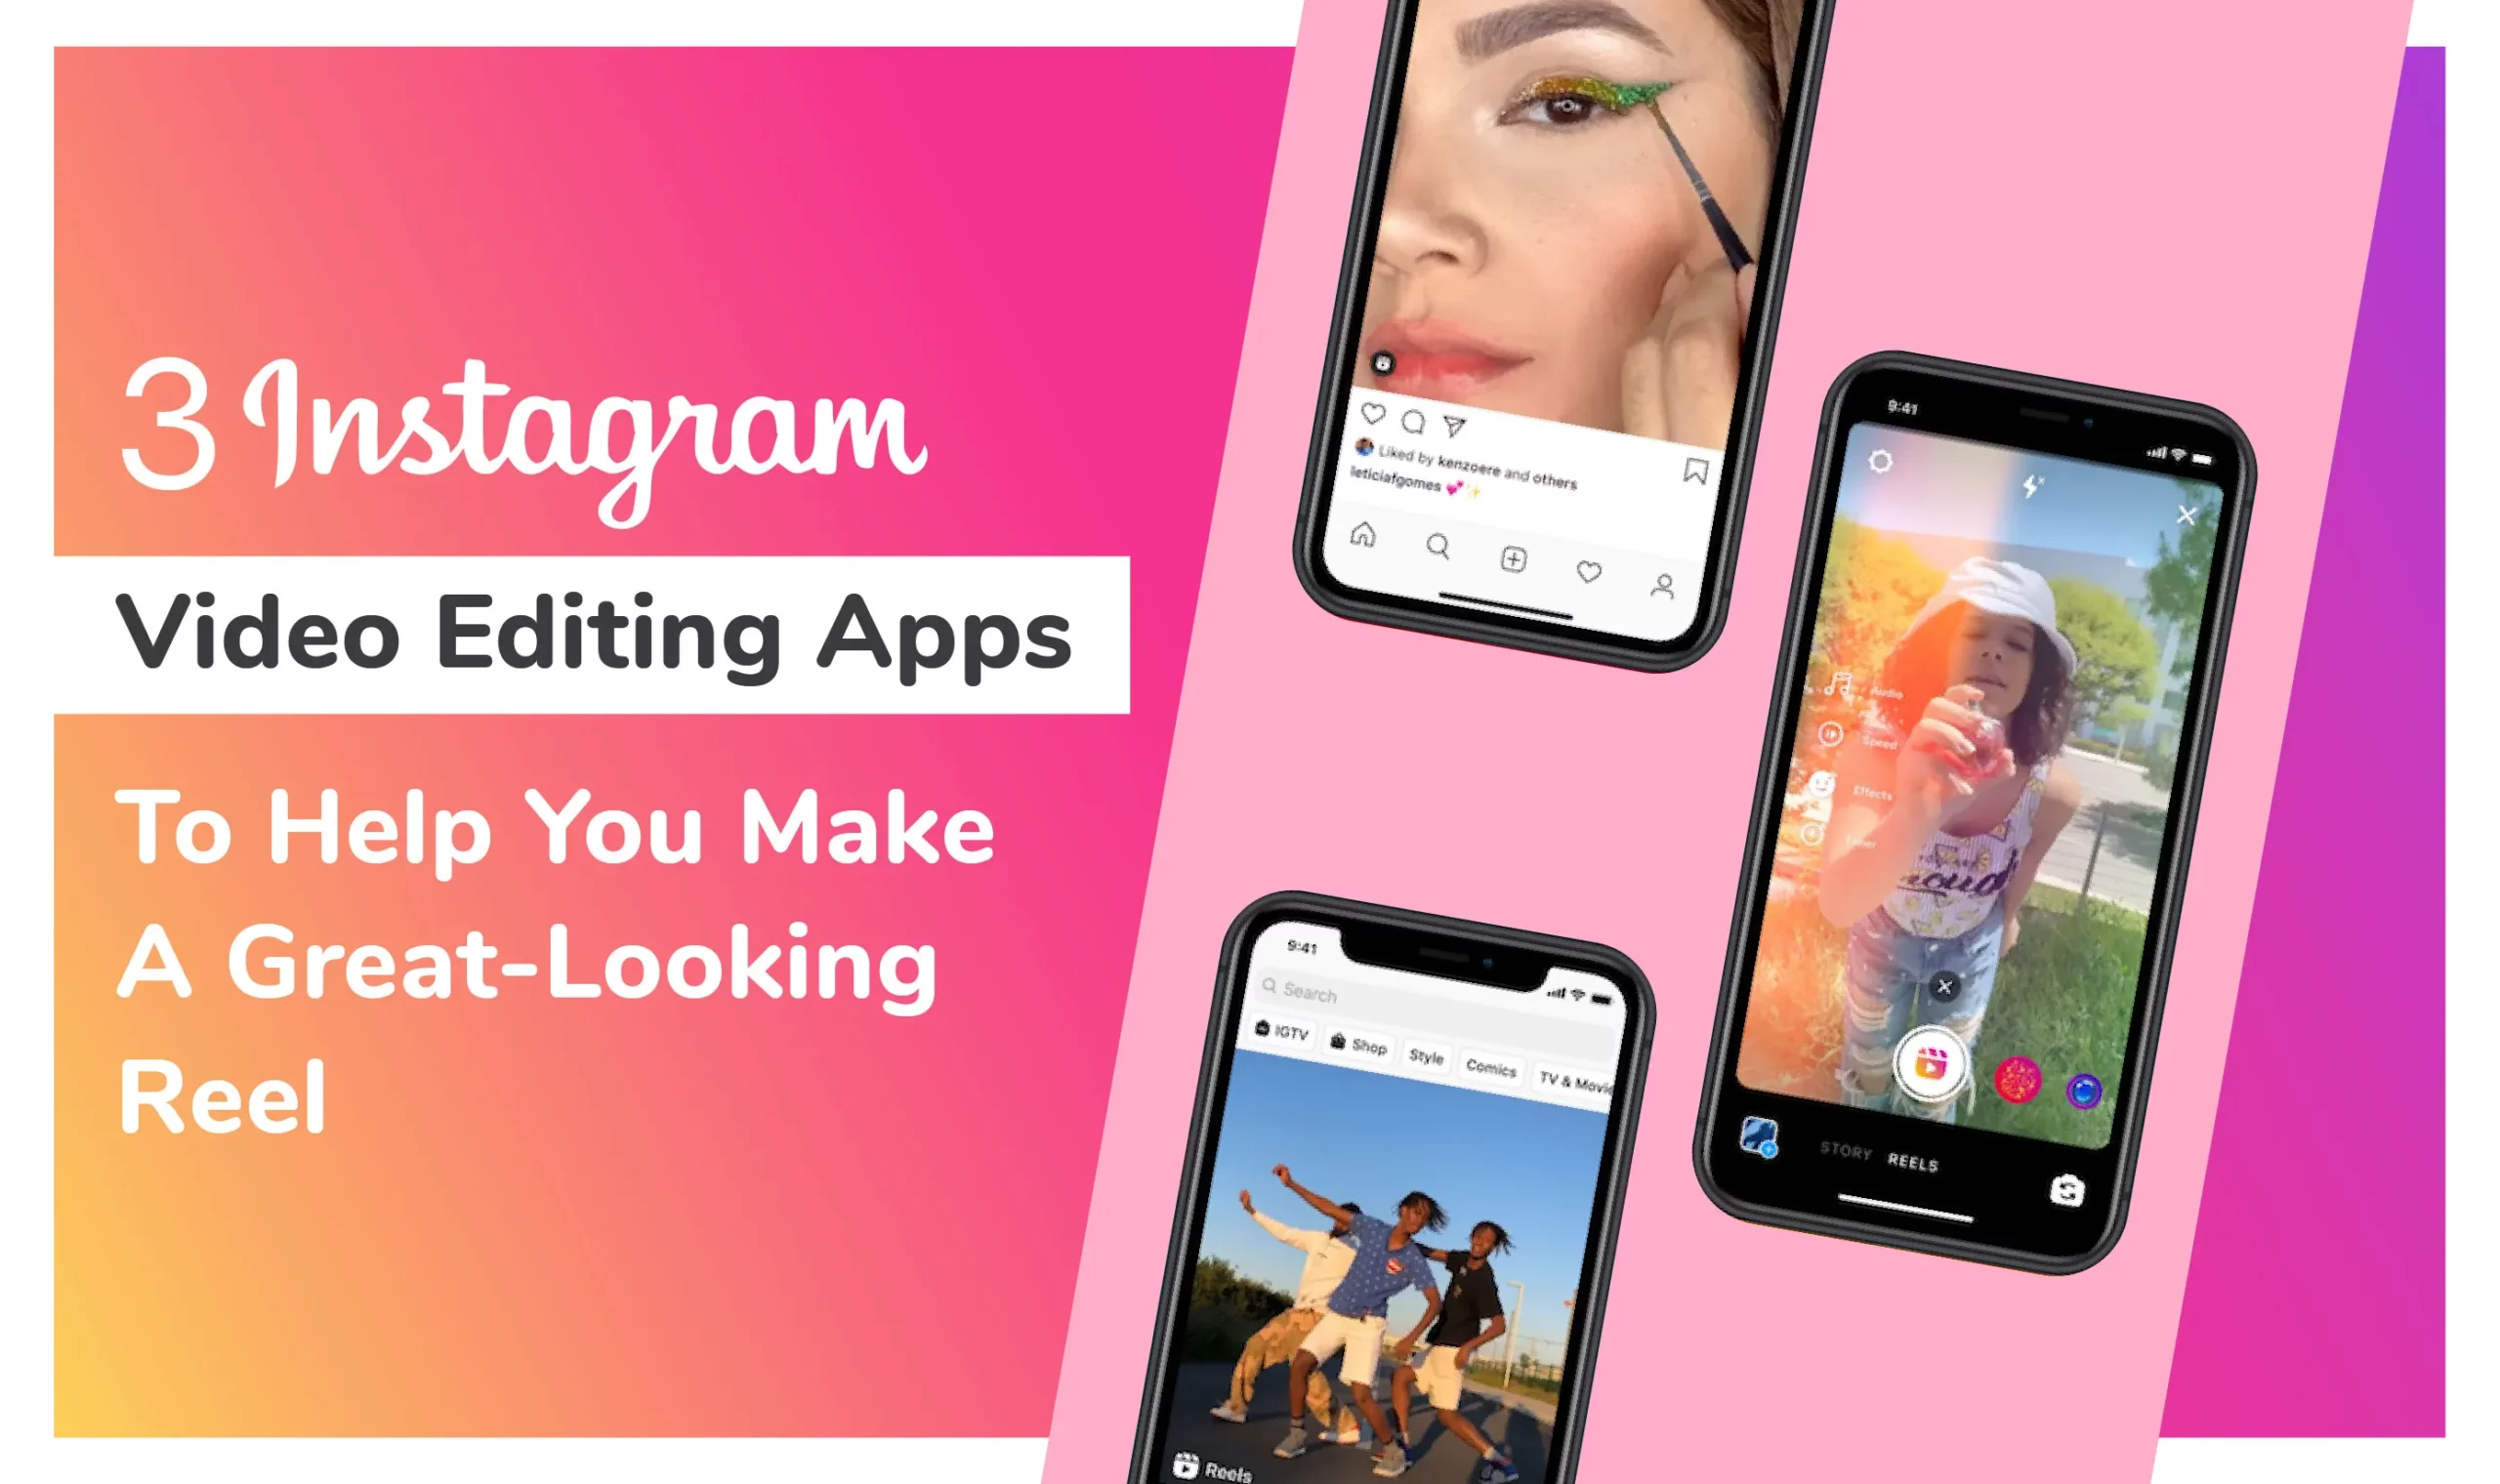 3 Instagram Video Editing Apps To Help You Make A Great-Looking